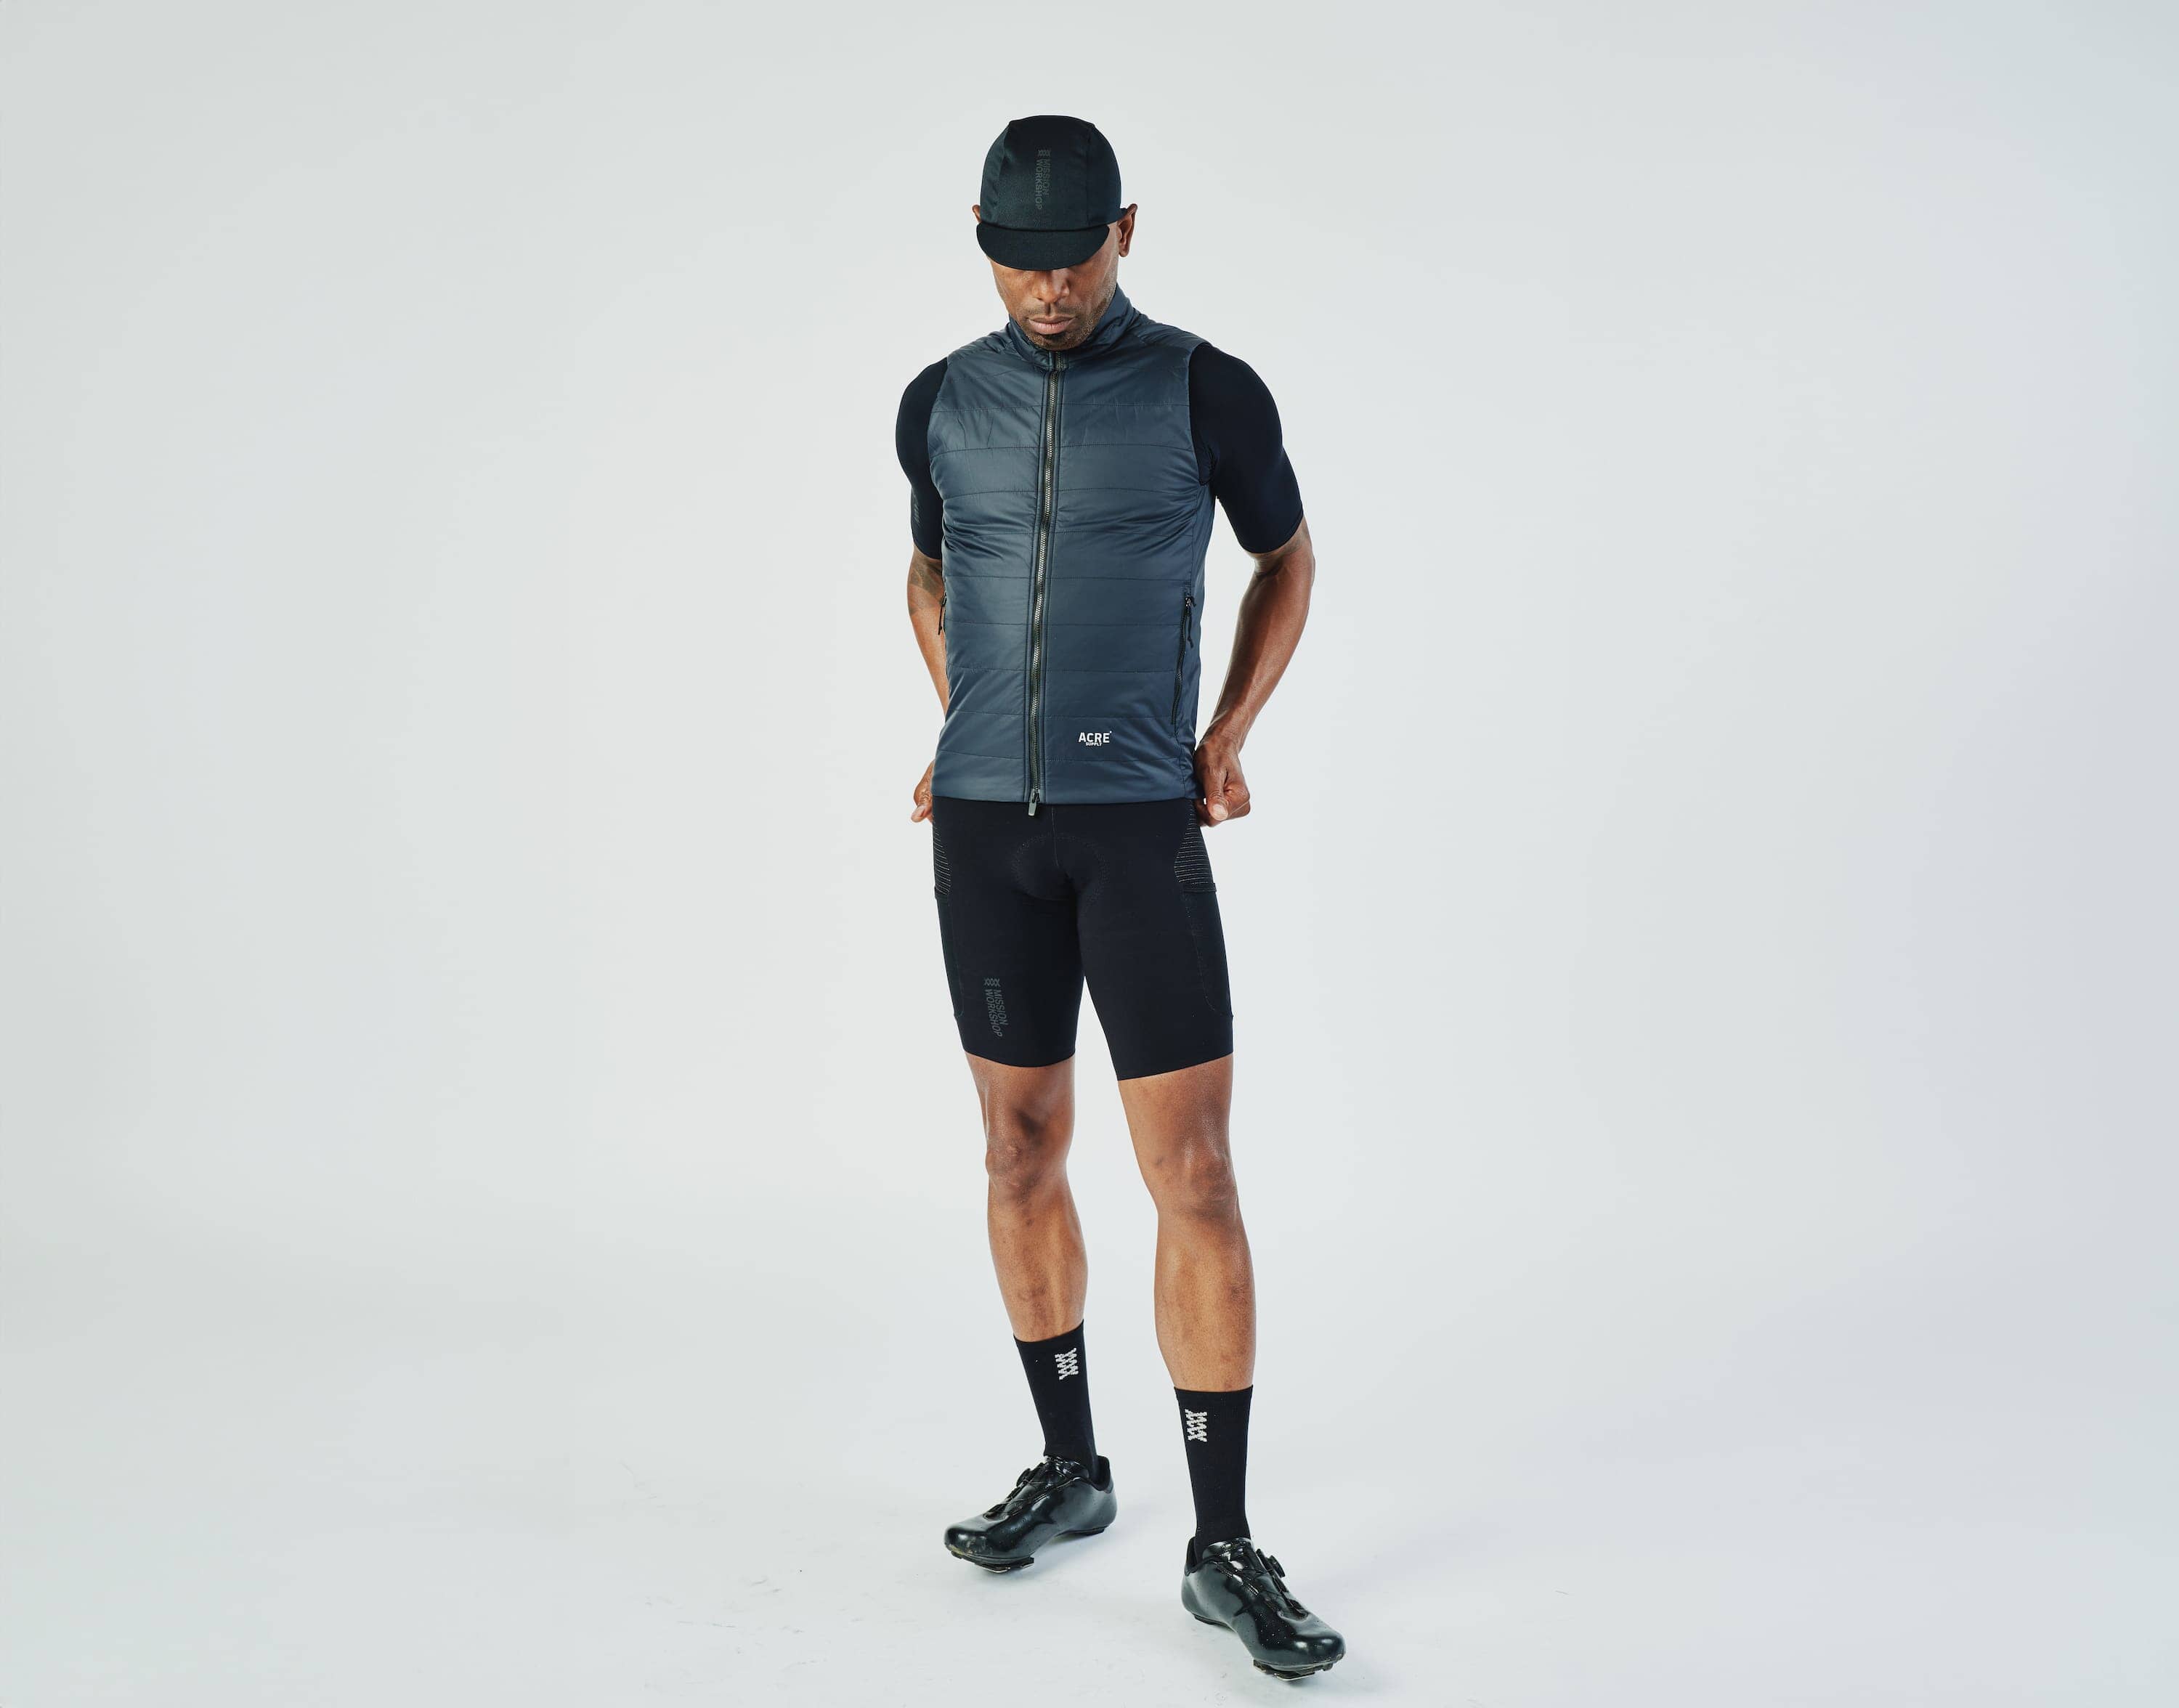 Acre Serien Cycling Collection